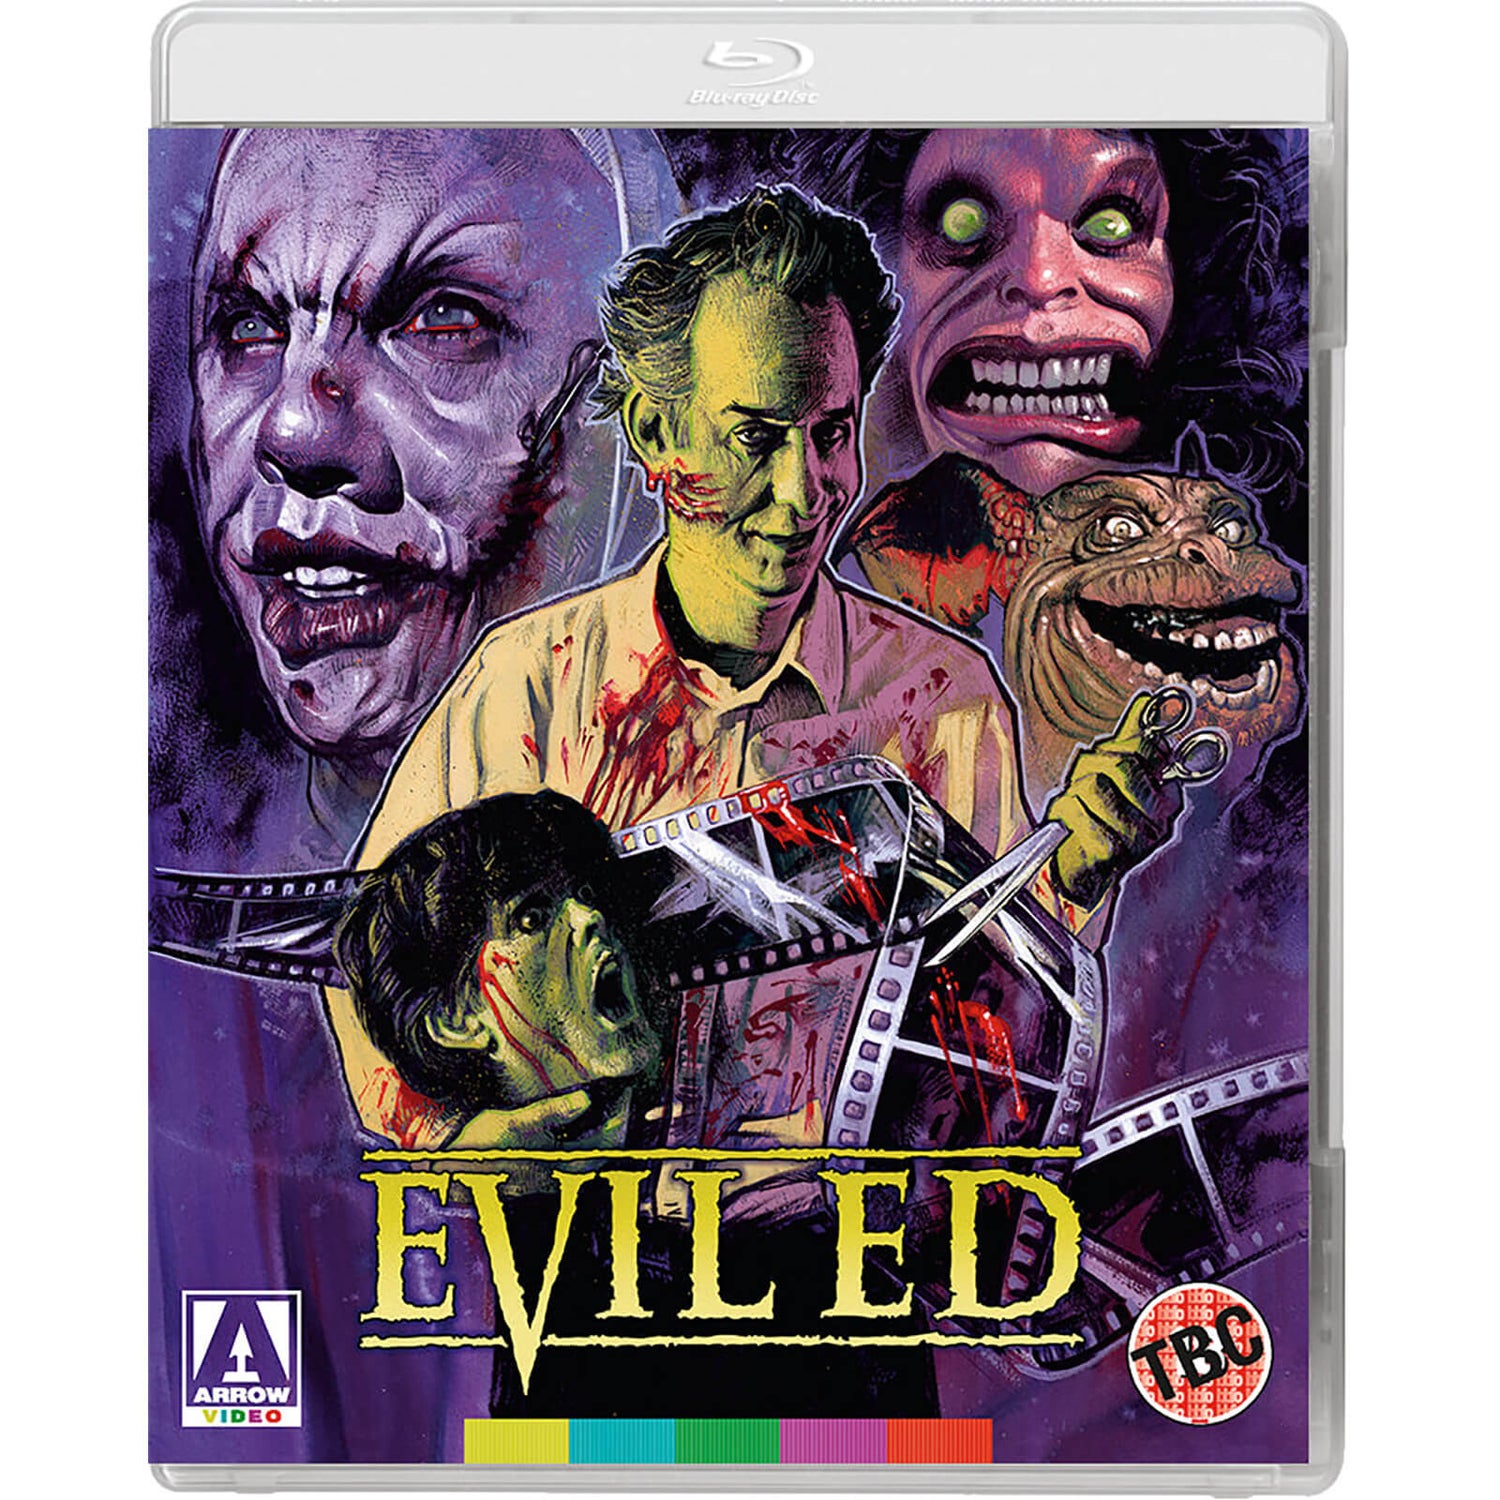 Evil Ed - Dual Format (Includes DVD)